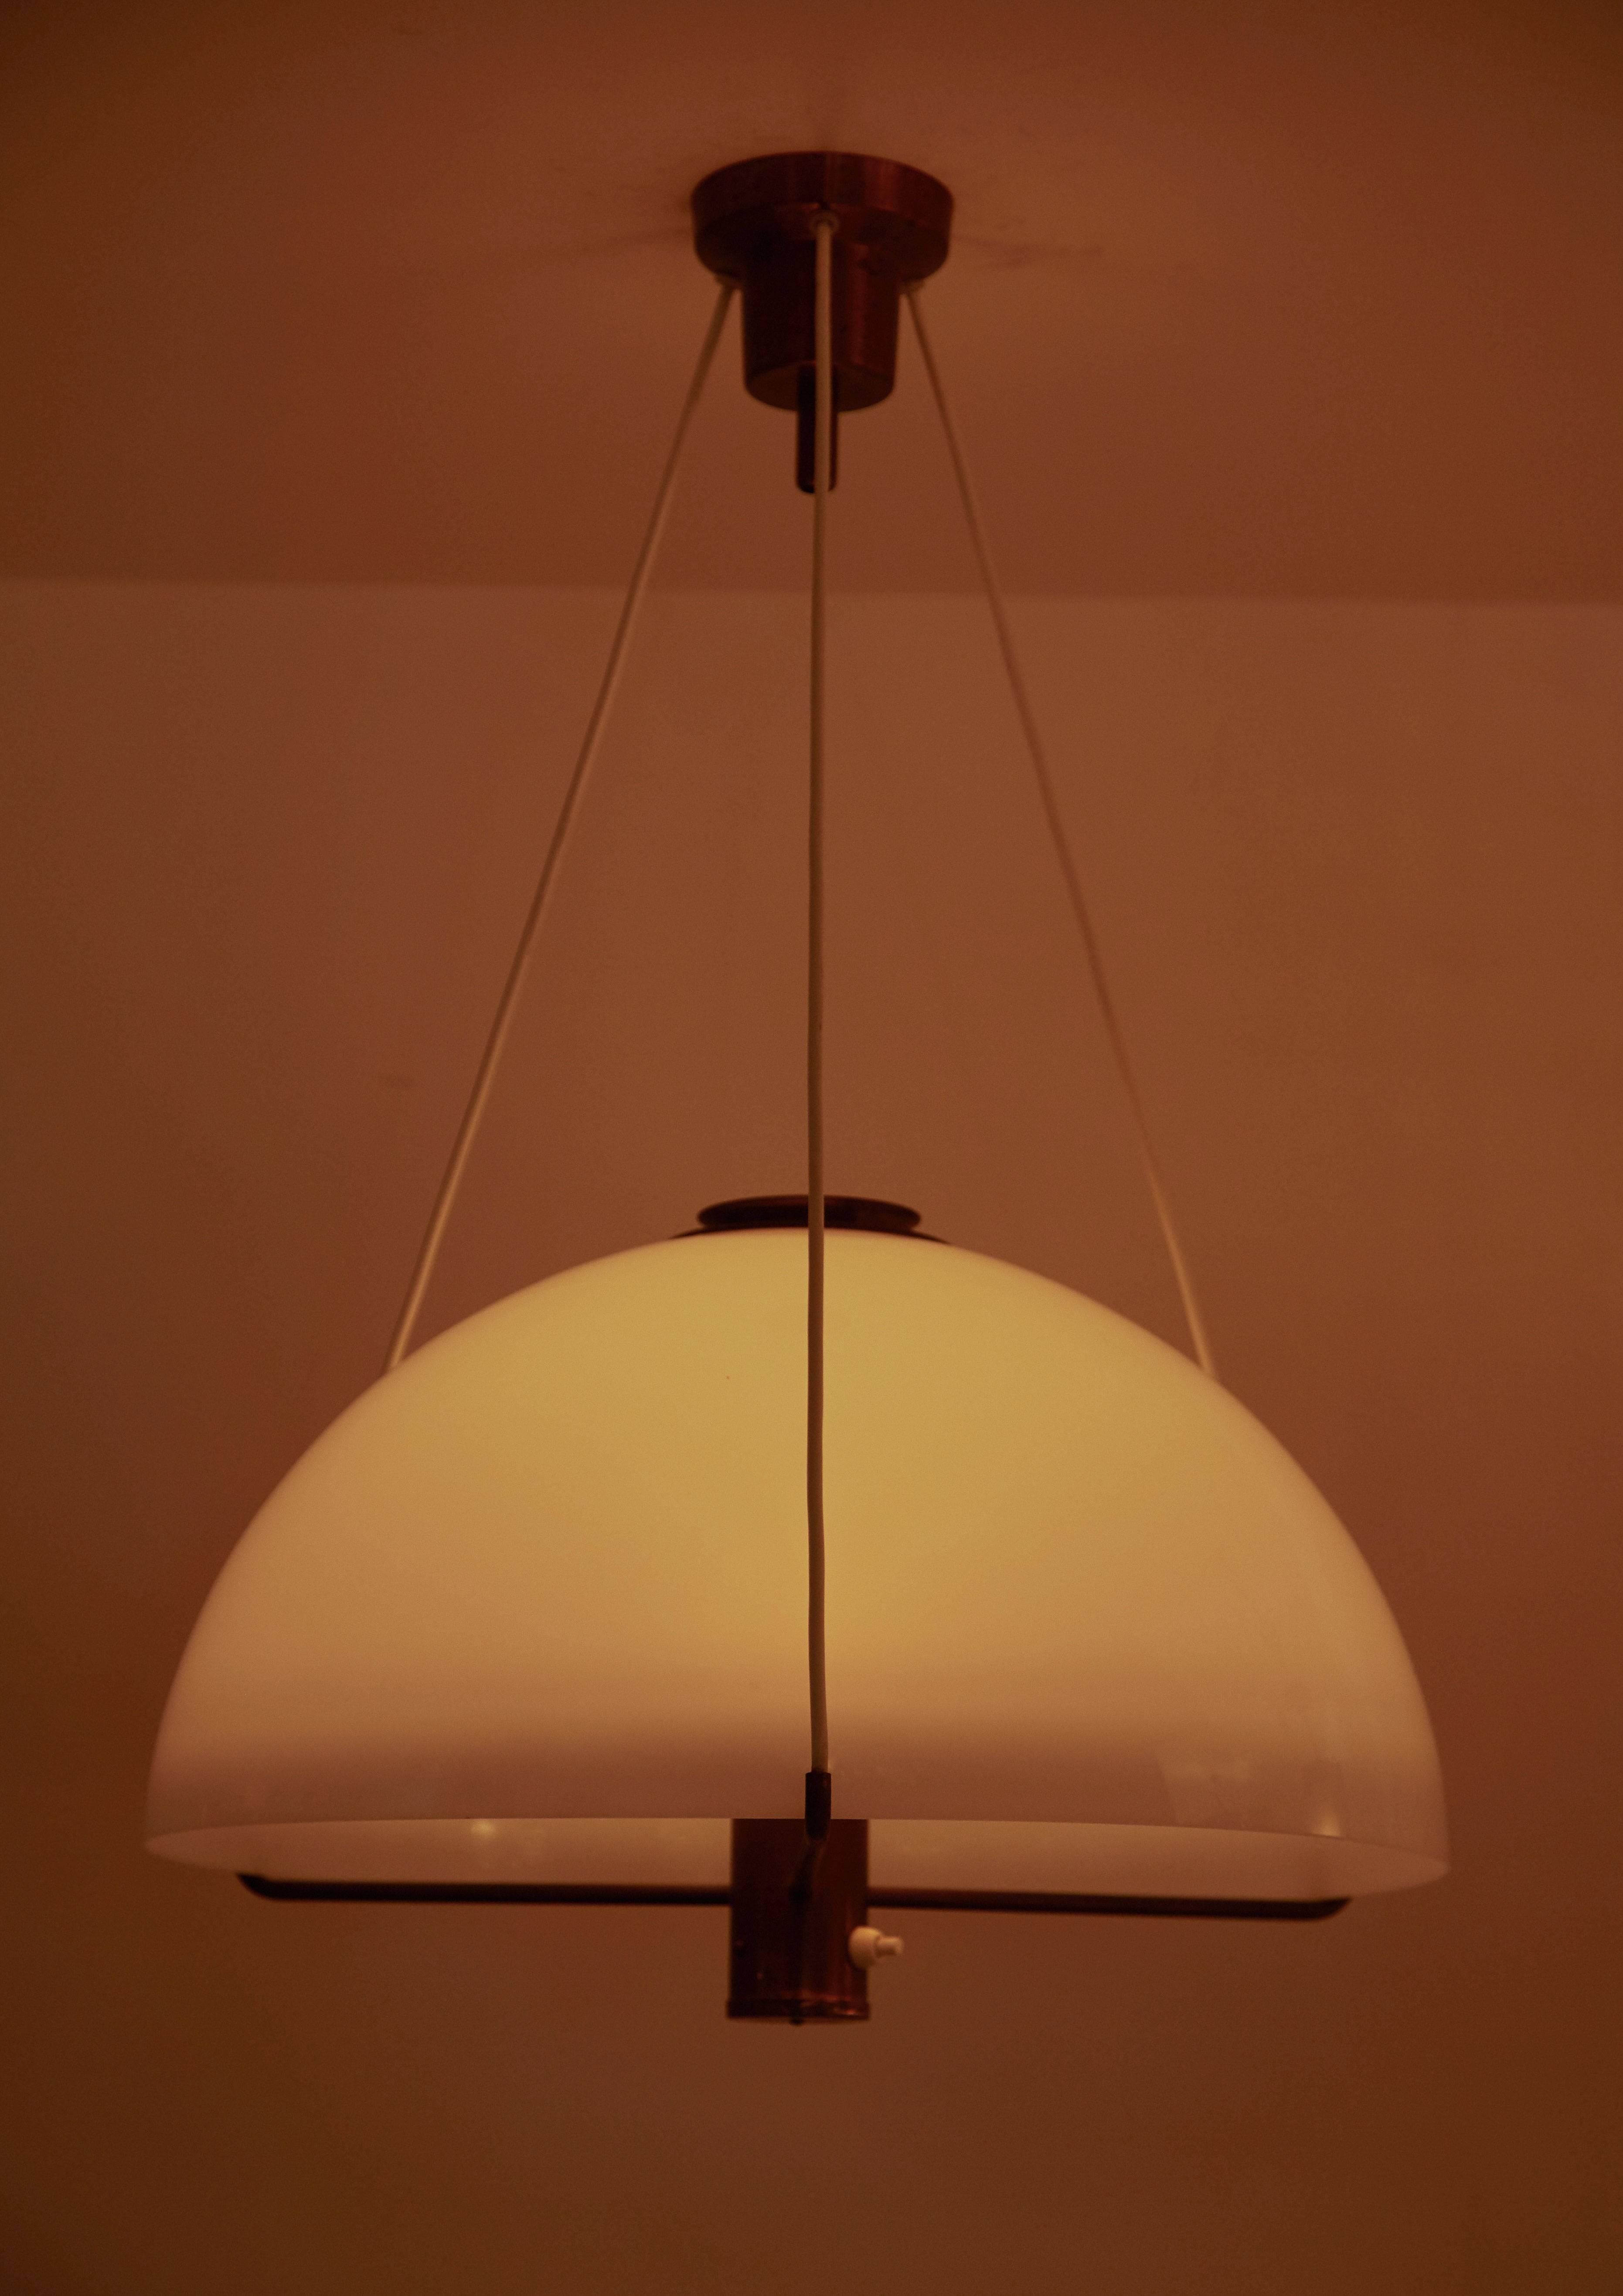 Suspension light by Hans-Agne Jakobsson for Markaryd. Designed in the 1950s. Diffuser in white acrylic and frame in brass. Wired for US junction boxes. Takes an E27 75w maximum bulb.

Fixture dimensions:
Diameter 16.9